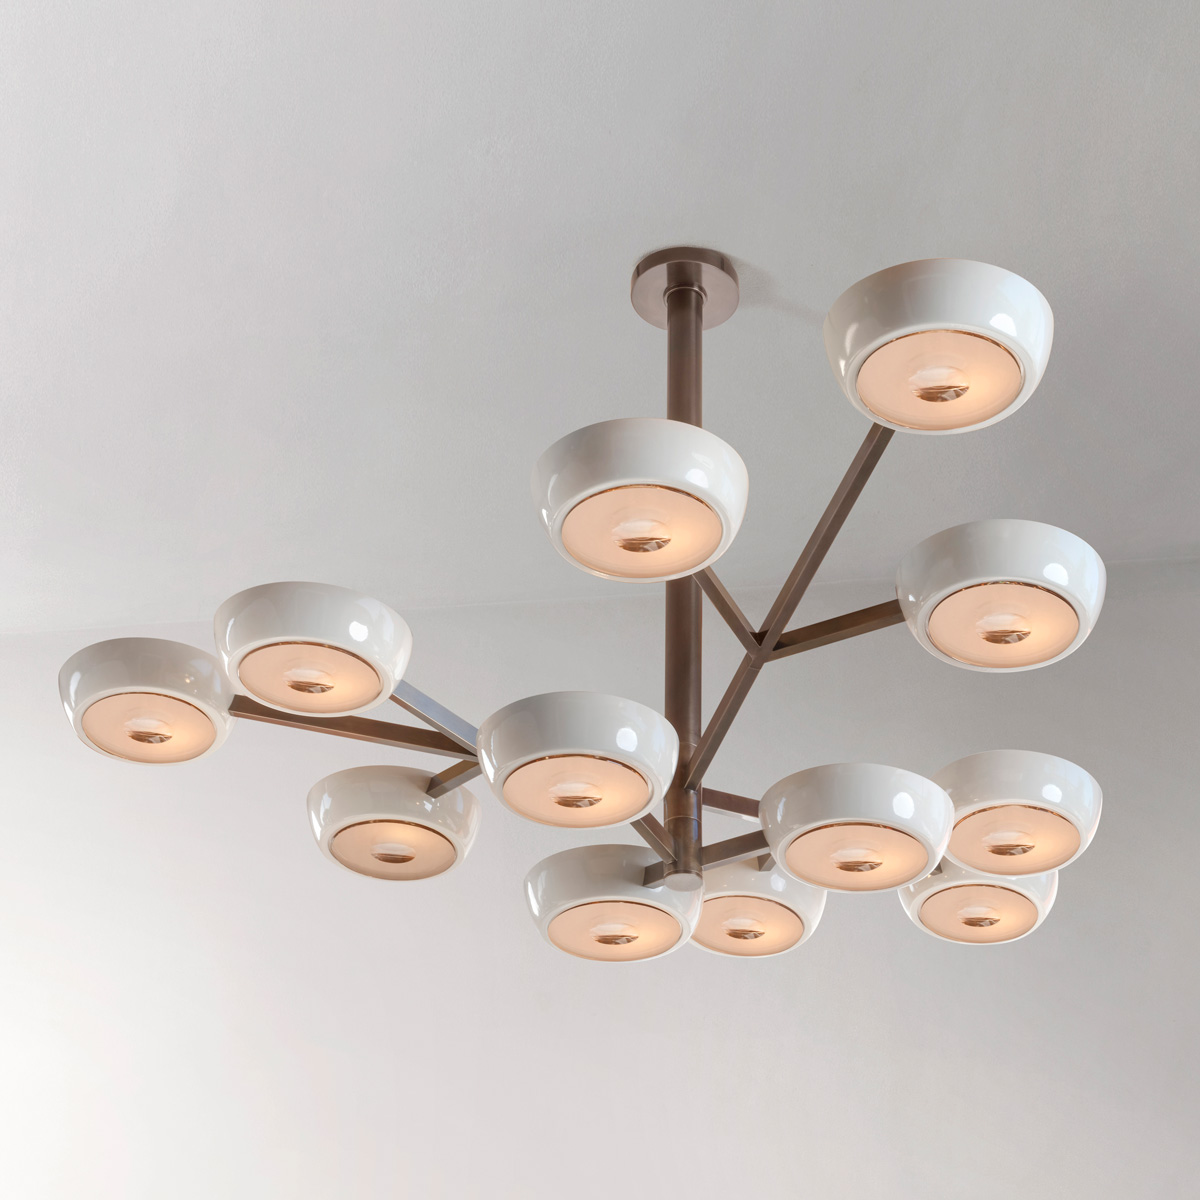 rose grande ceiling light by gaspare asaro